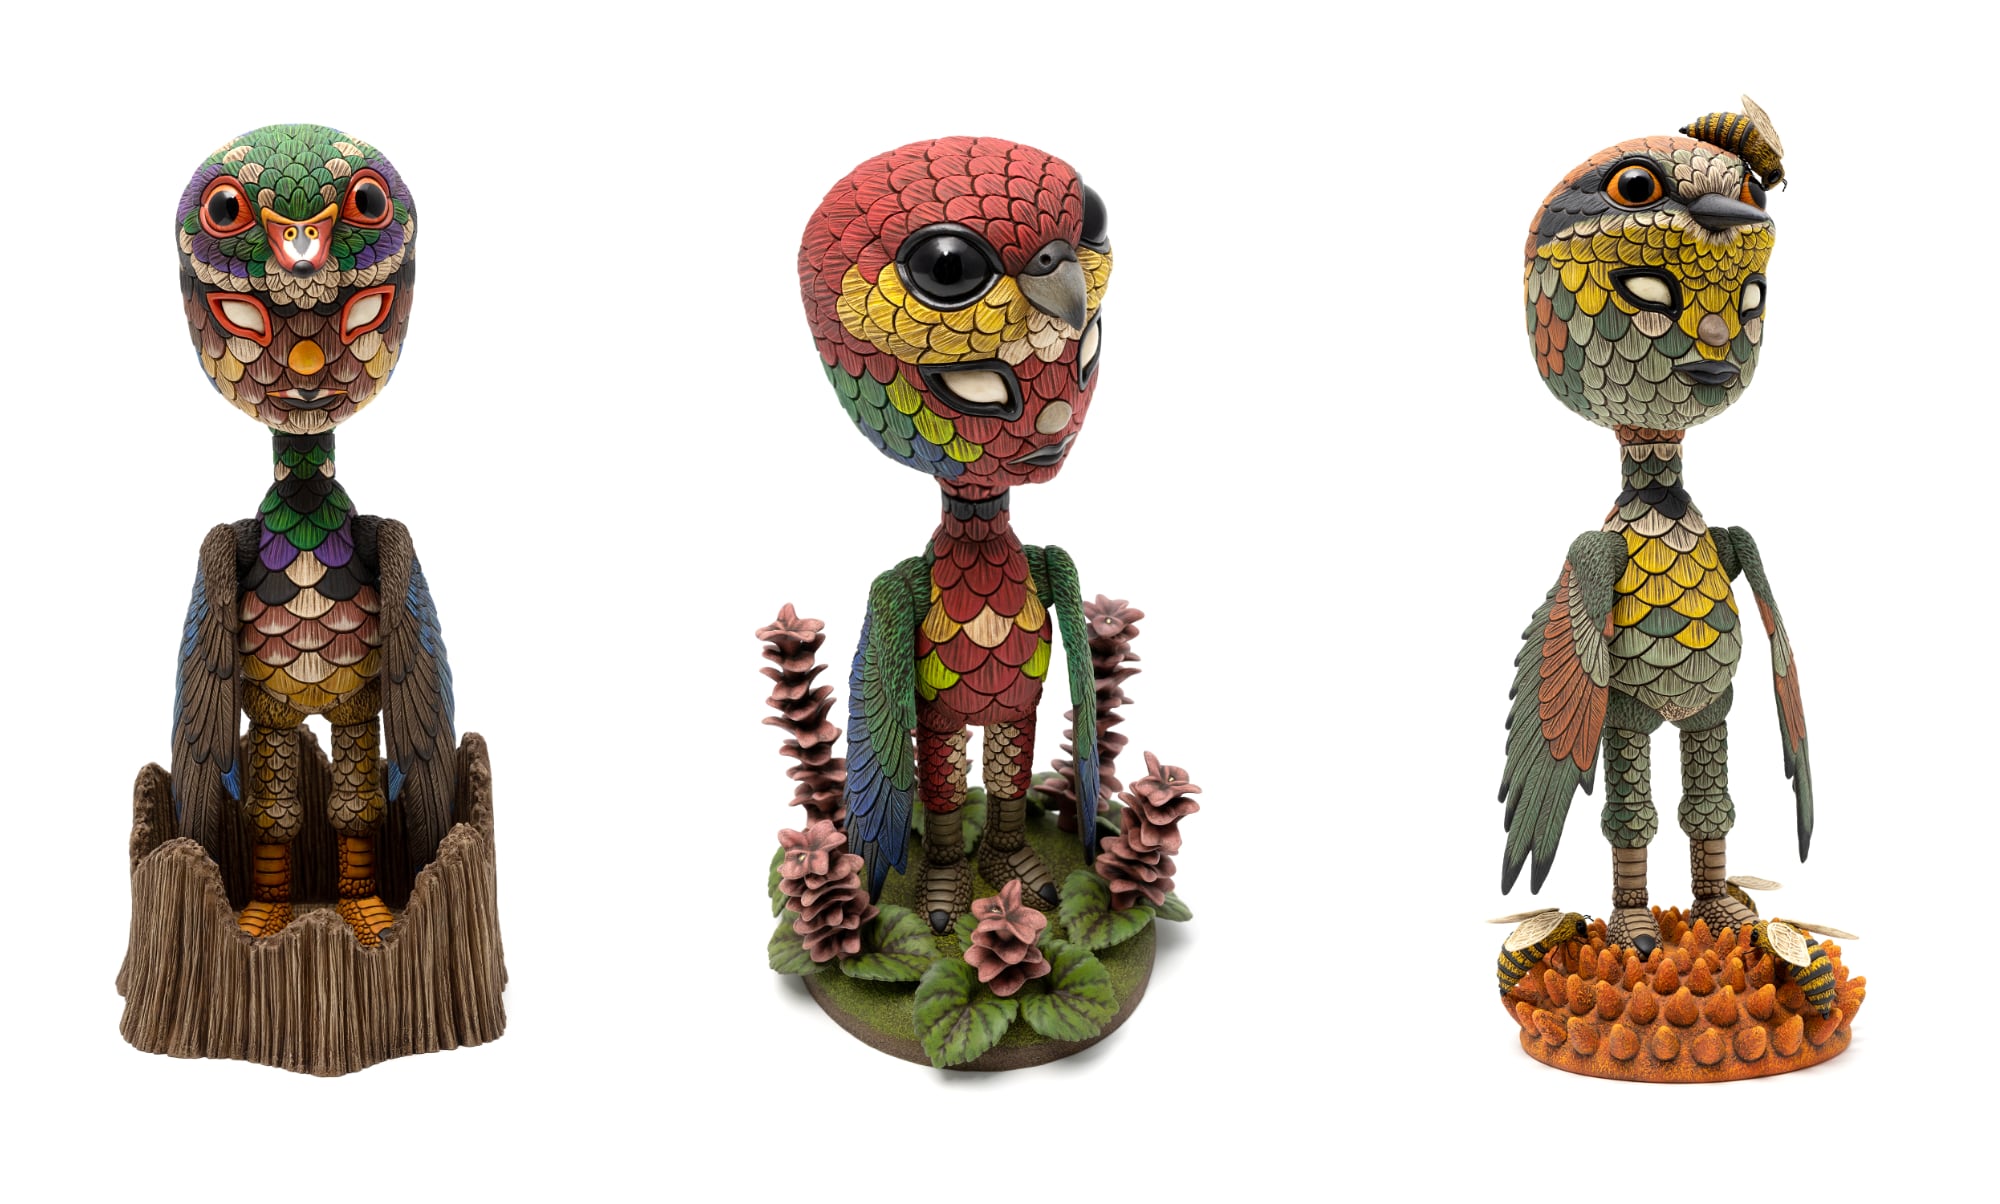 Three ceramic sculptures of a figure camouflaged as birds.